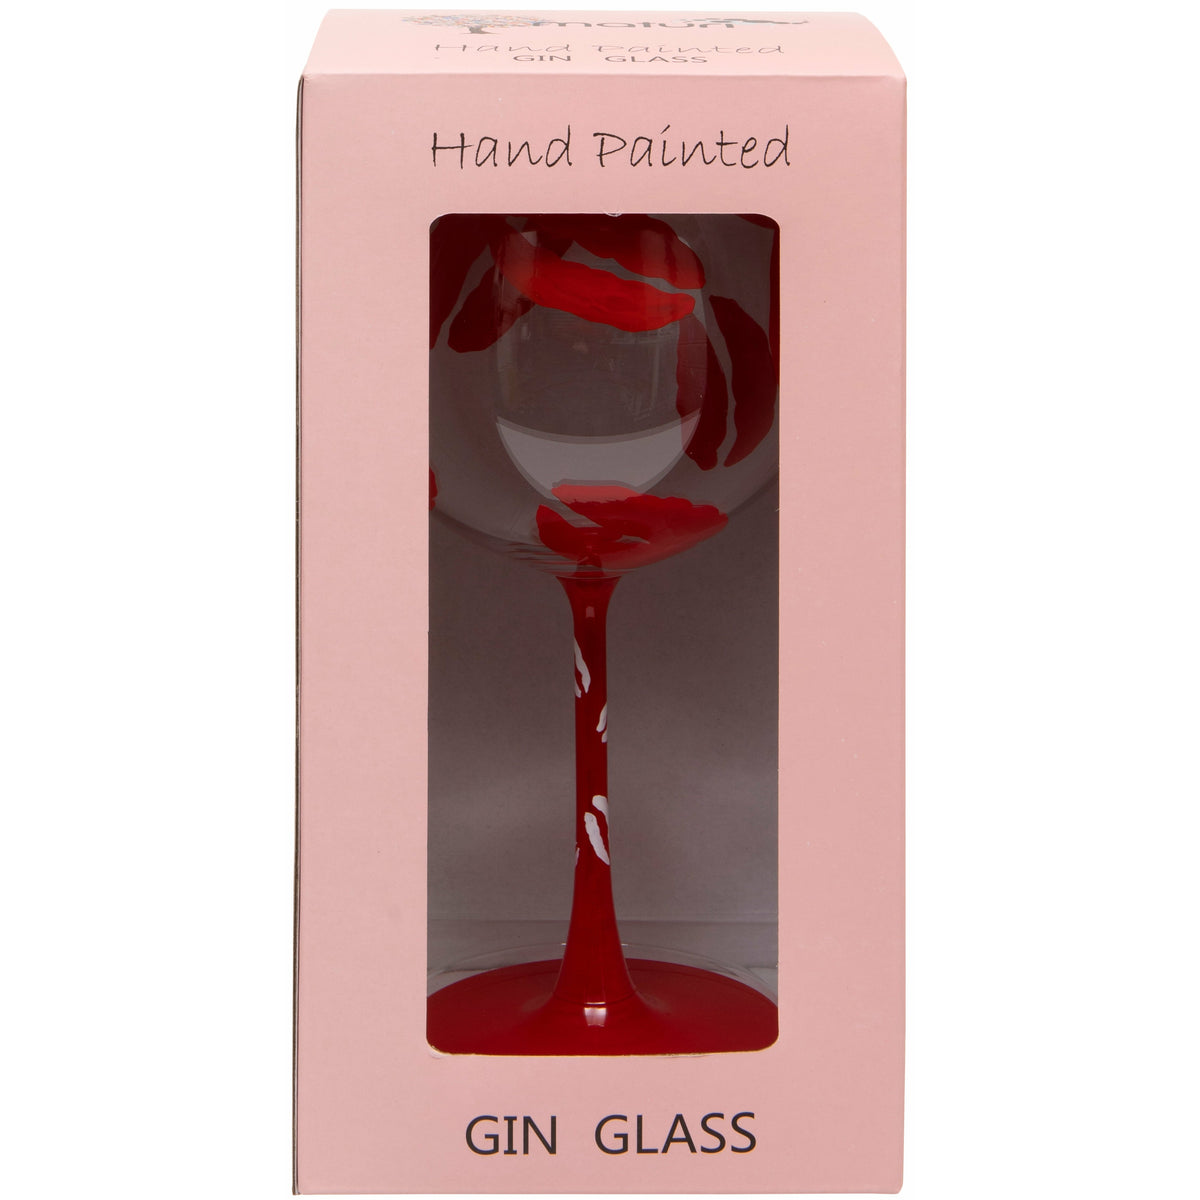 Hand Painted Kiss Gin Glass in Box